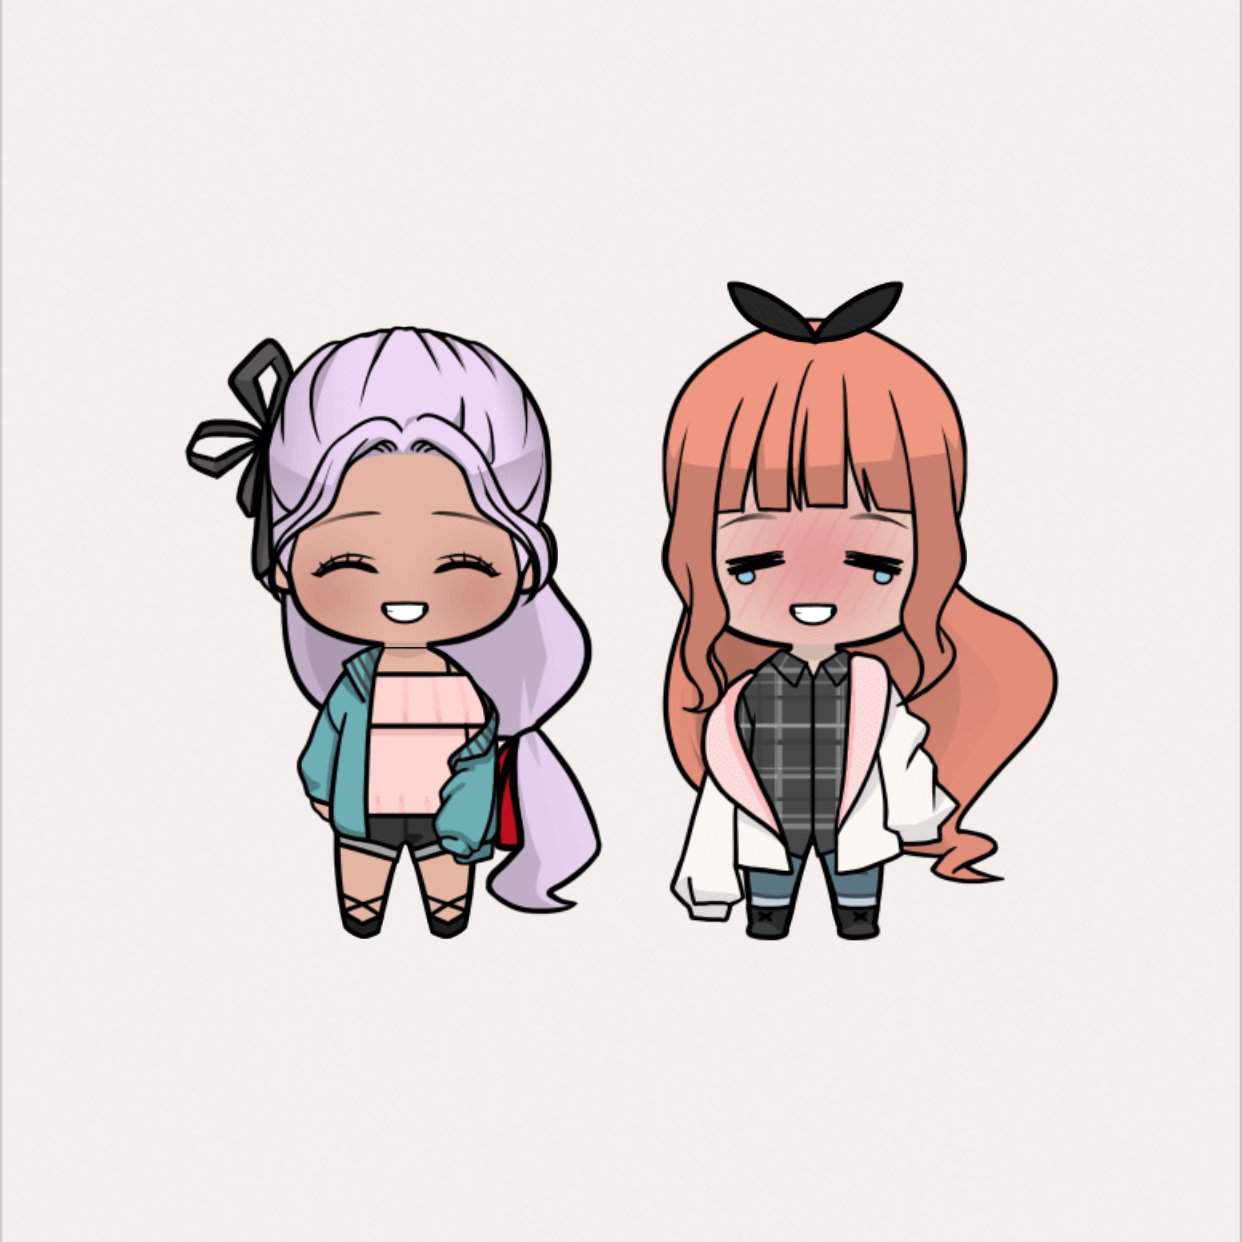 I made these two on a app called UnnieDoll. They’re names are Lilac and